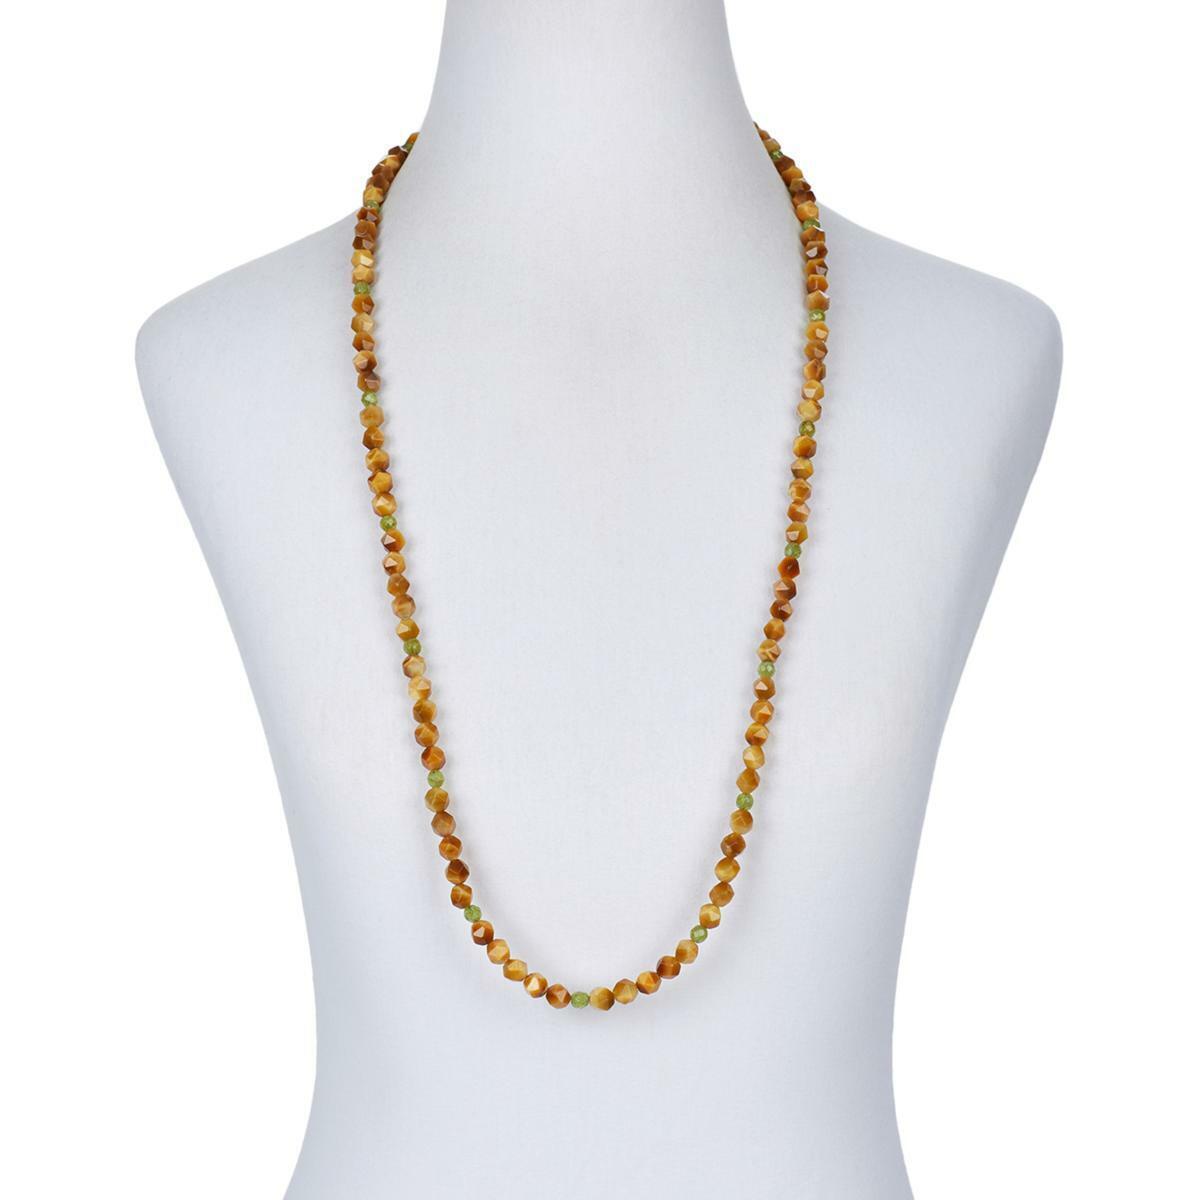 Jay King 36" Golden Cat's Eye and Peridot Bead Necklace ~